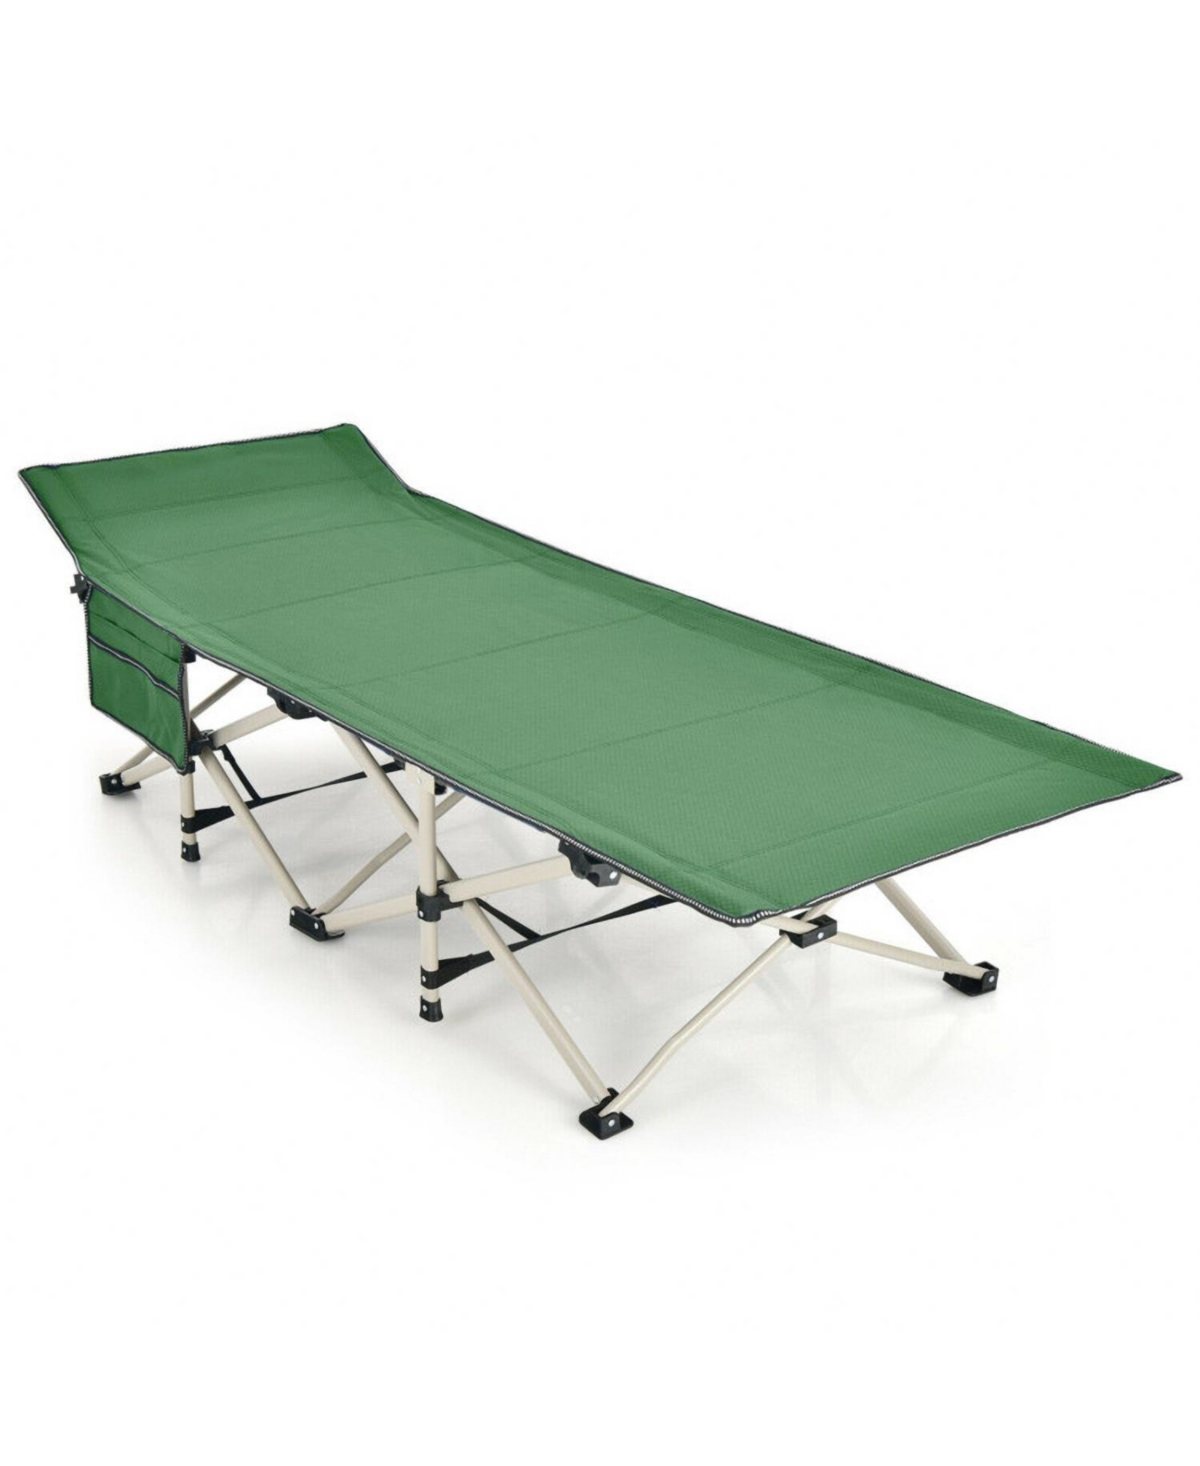 28.5 Inch Extra Wide Sleeping Cot for Adults with Carry Bag - Green